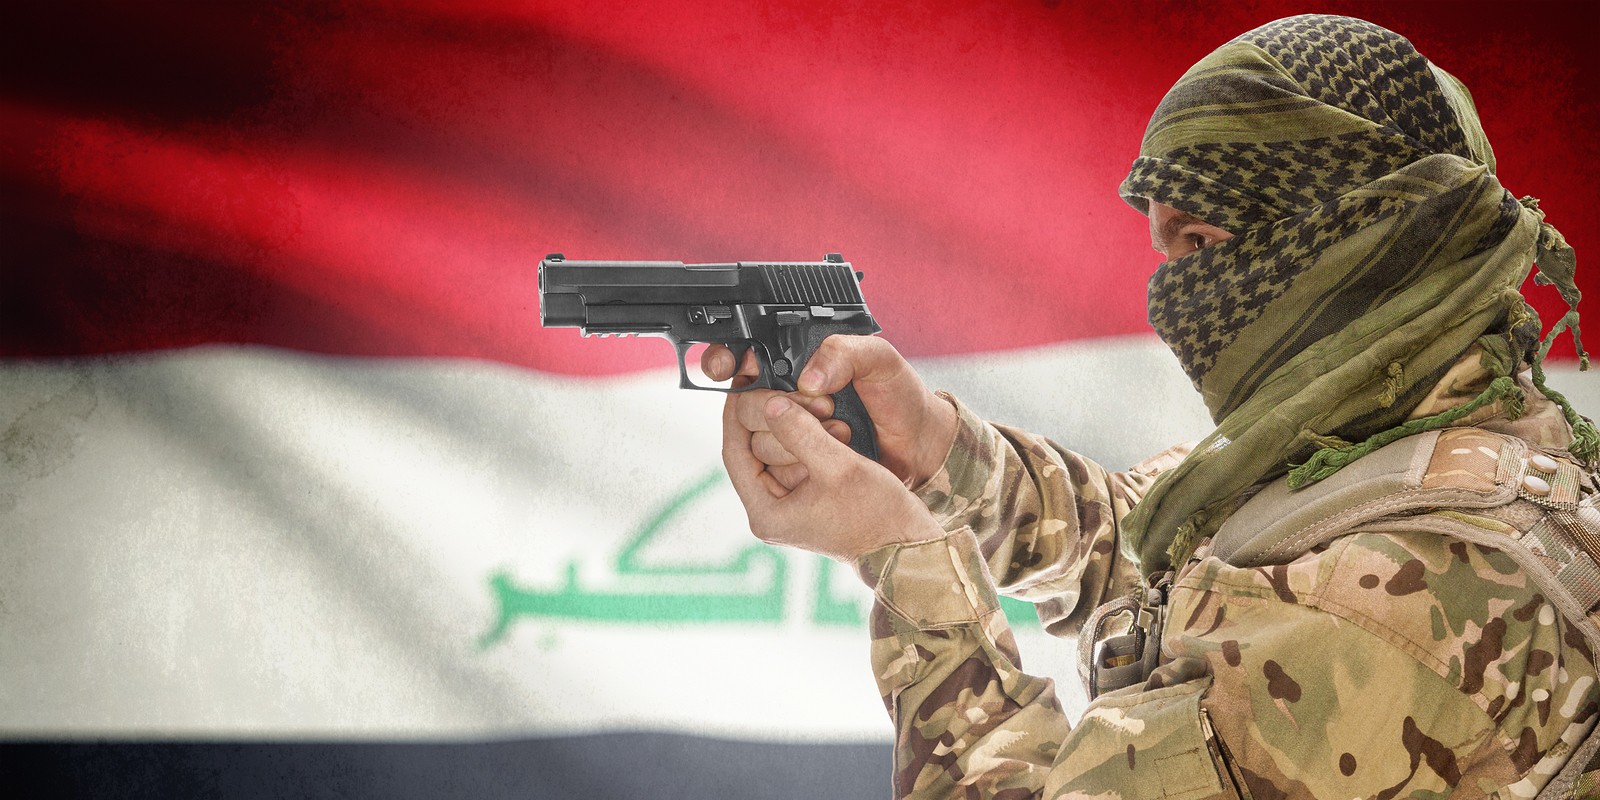 Male with gun in hand and national flag on background series - Iraq